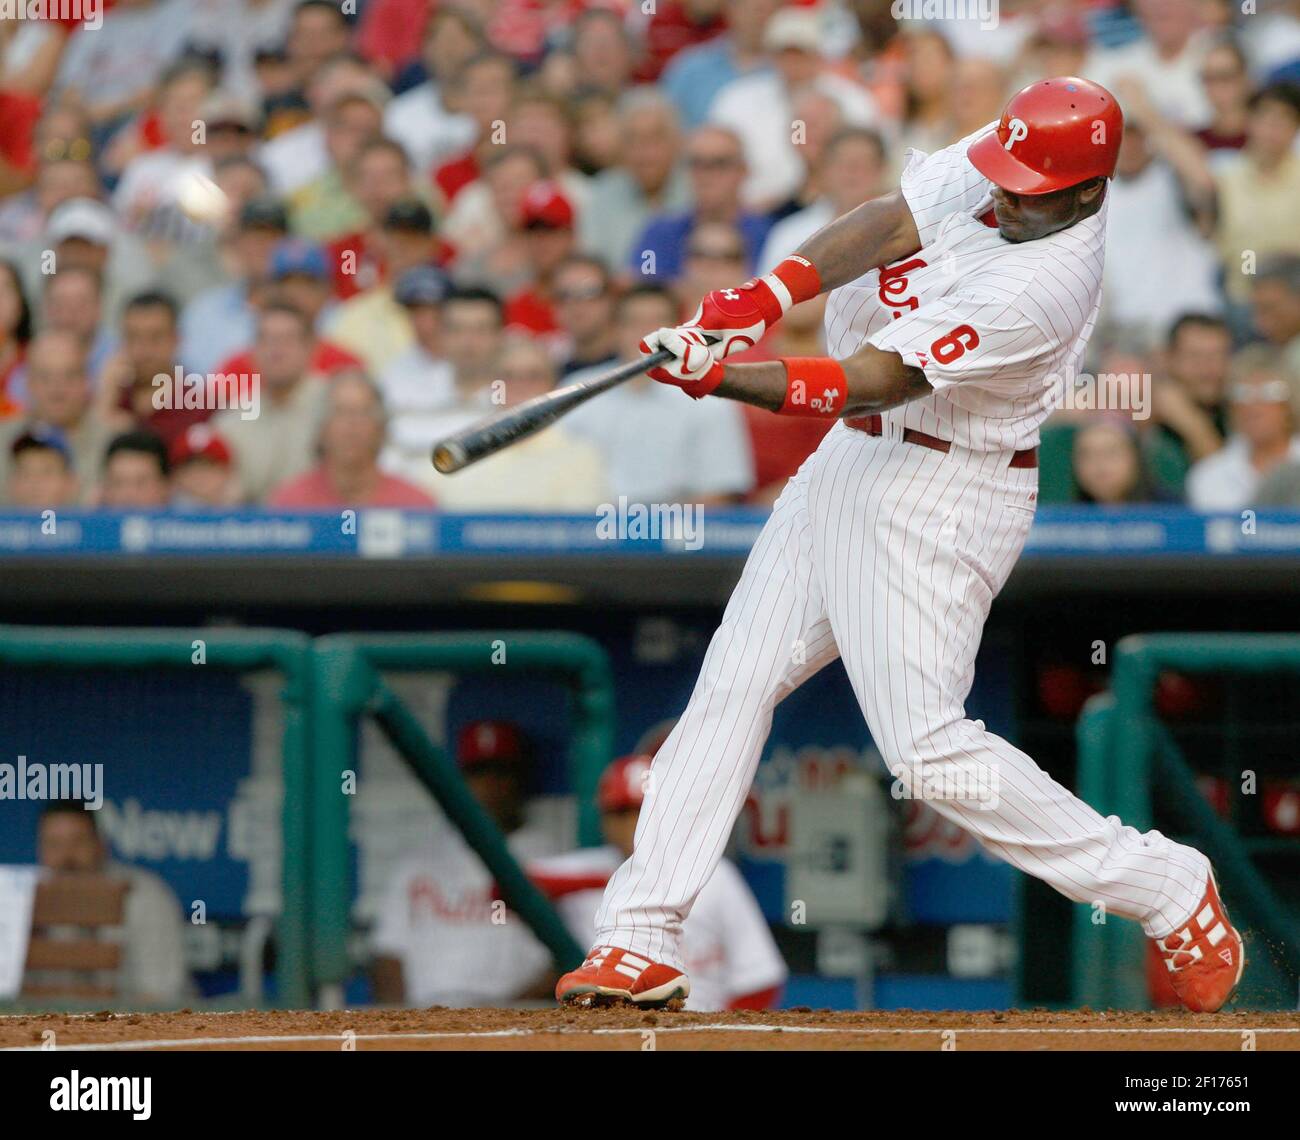 Philadelphia Phillies' Ryan Howard hits a three-run home run in the first  inning off a pitch from New York Yankees' Mike Mussina at Citizens Bank  Park in Philadelphia, Pennsylvania, on Tuesday, June